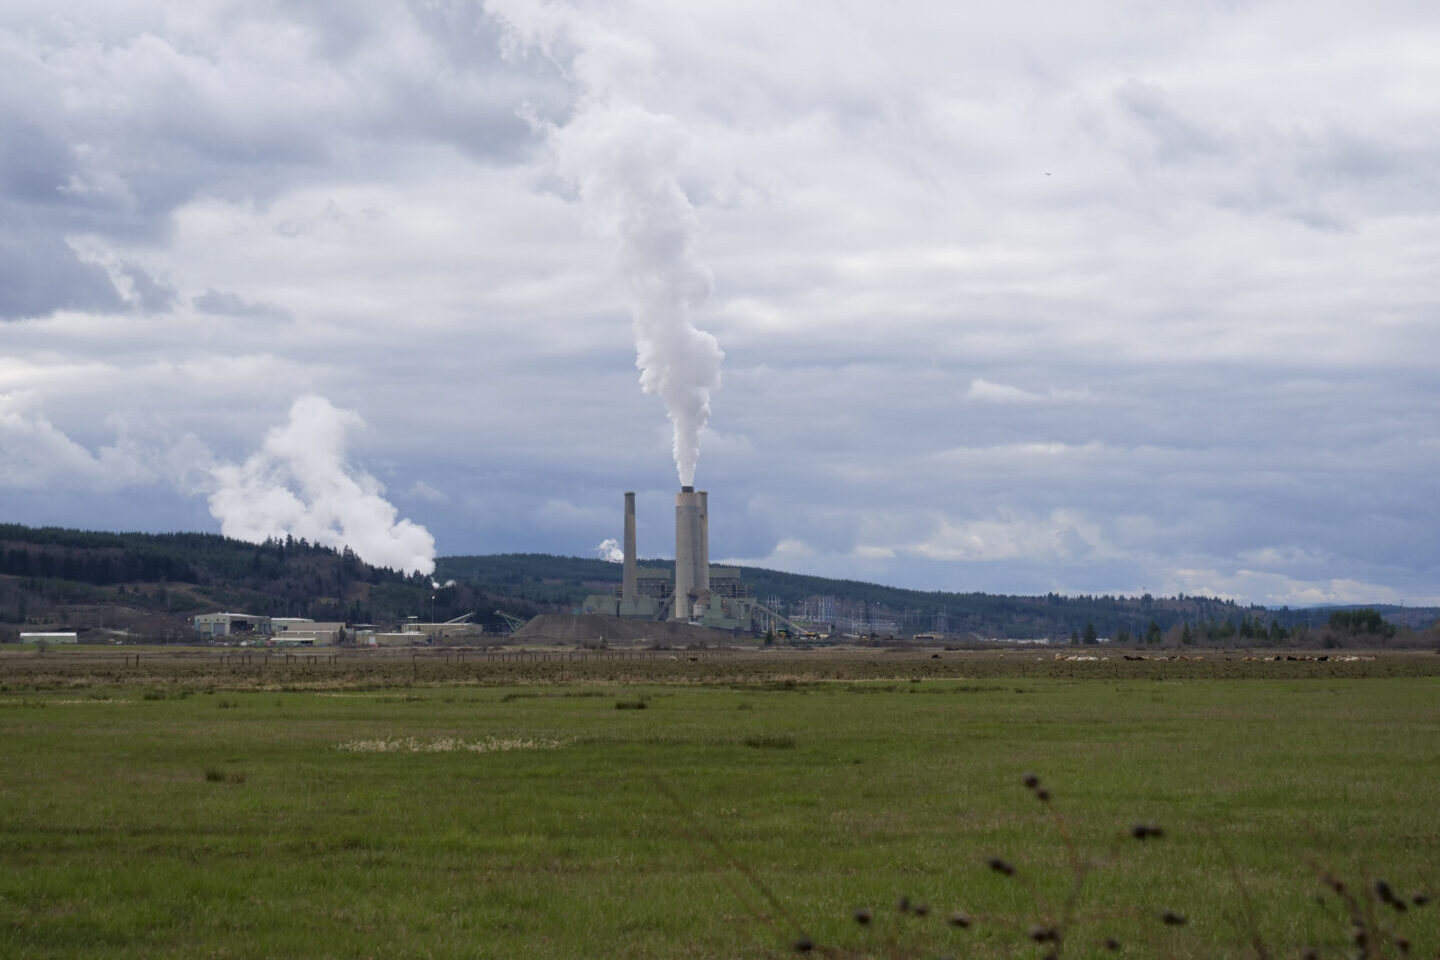 A power plant with large smokestacks shown from a distance.